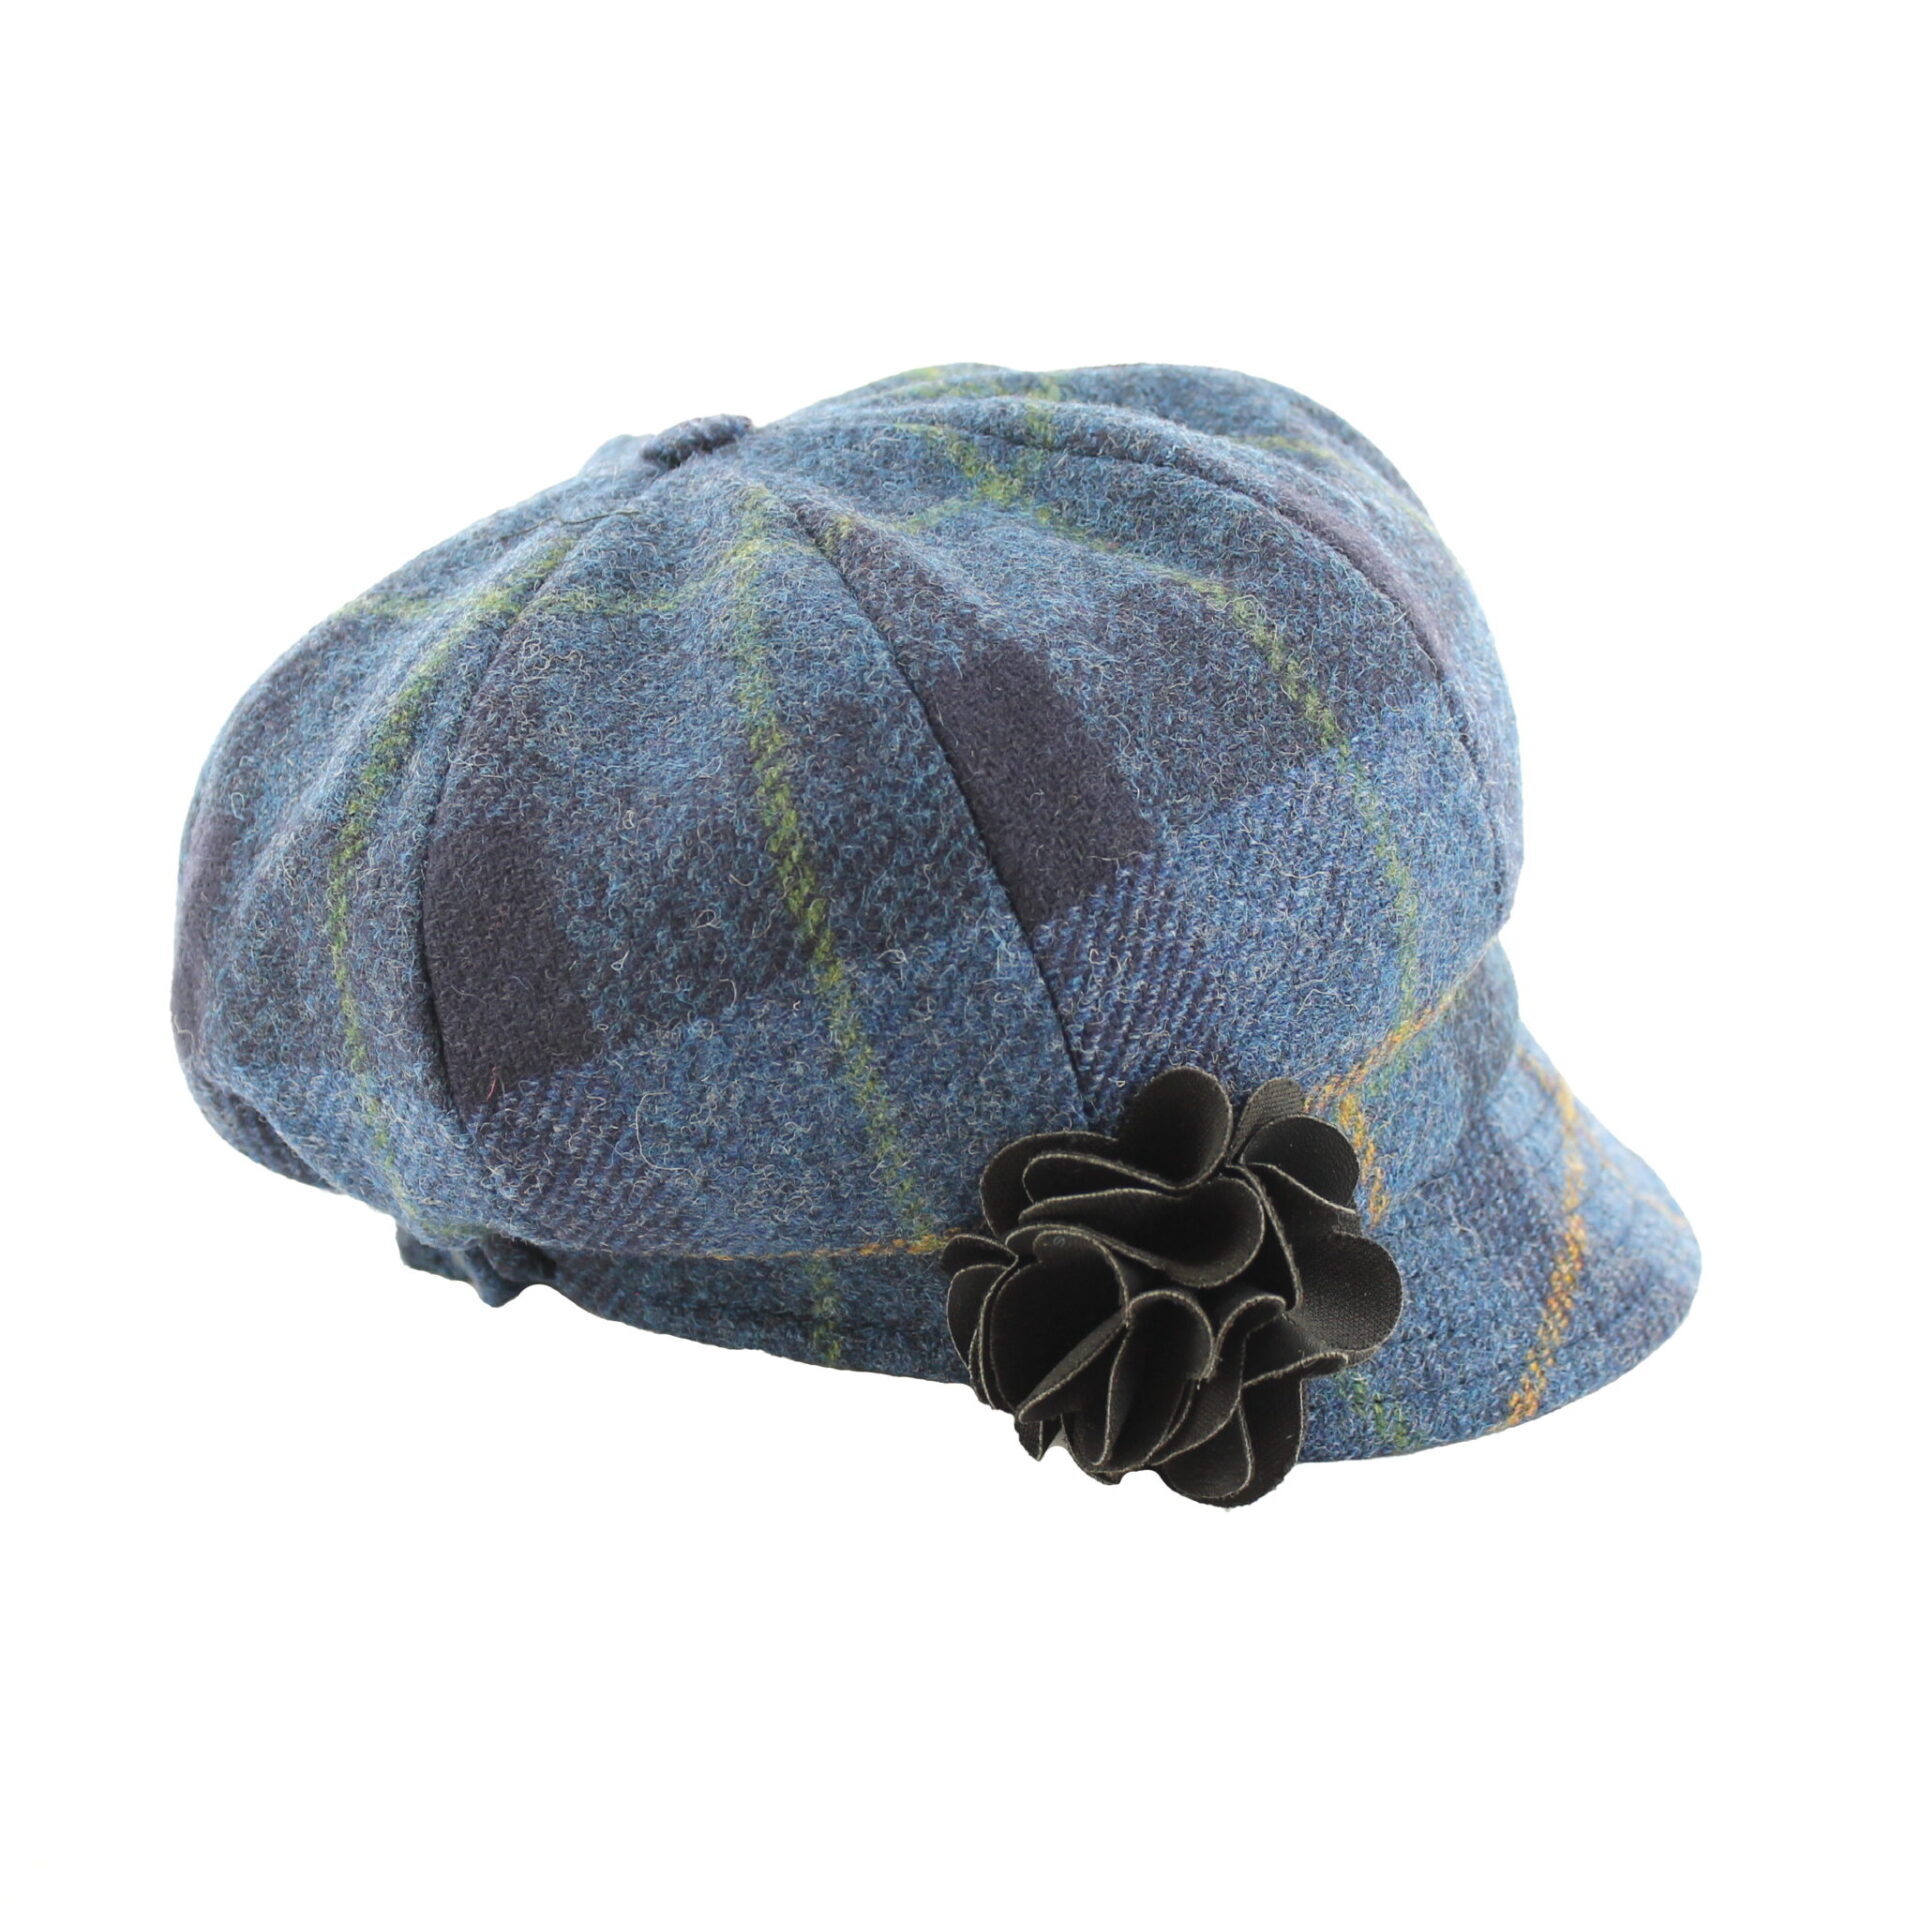 A blue hat with a flower on the side of it.